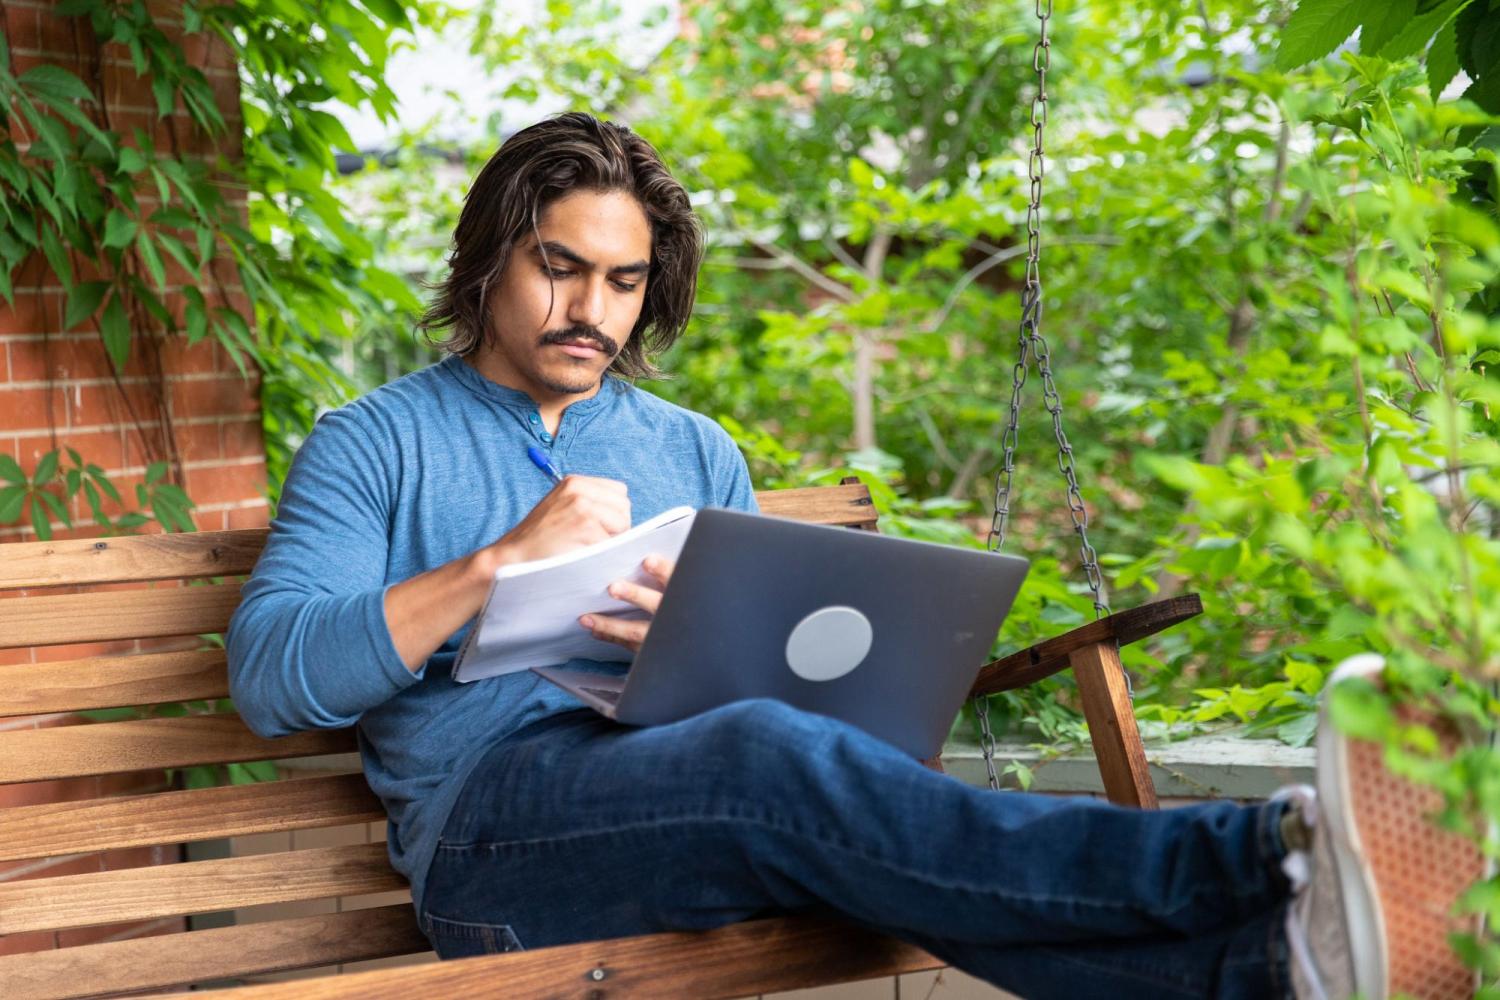 A student takes notes on a note pad while working on his laptop on a porch swing